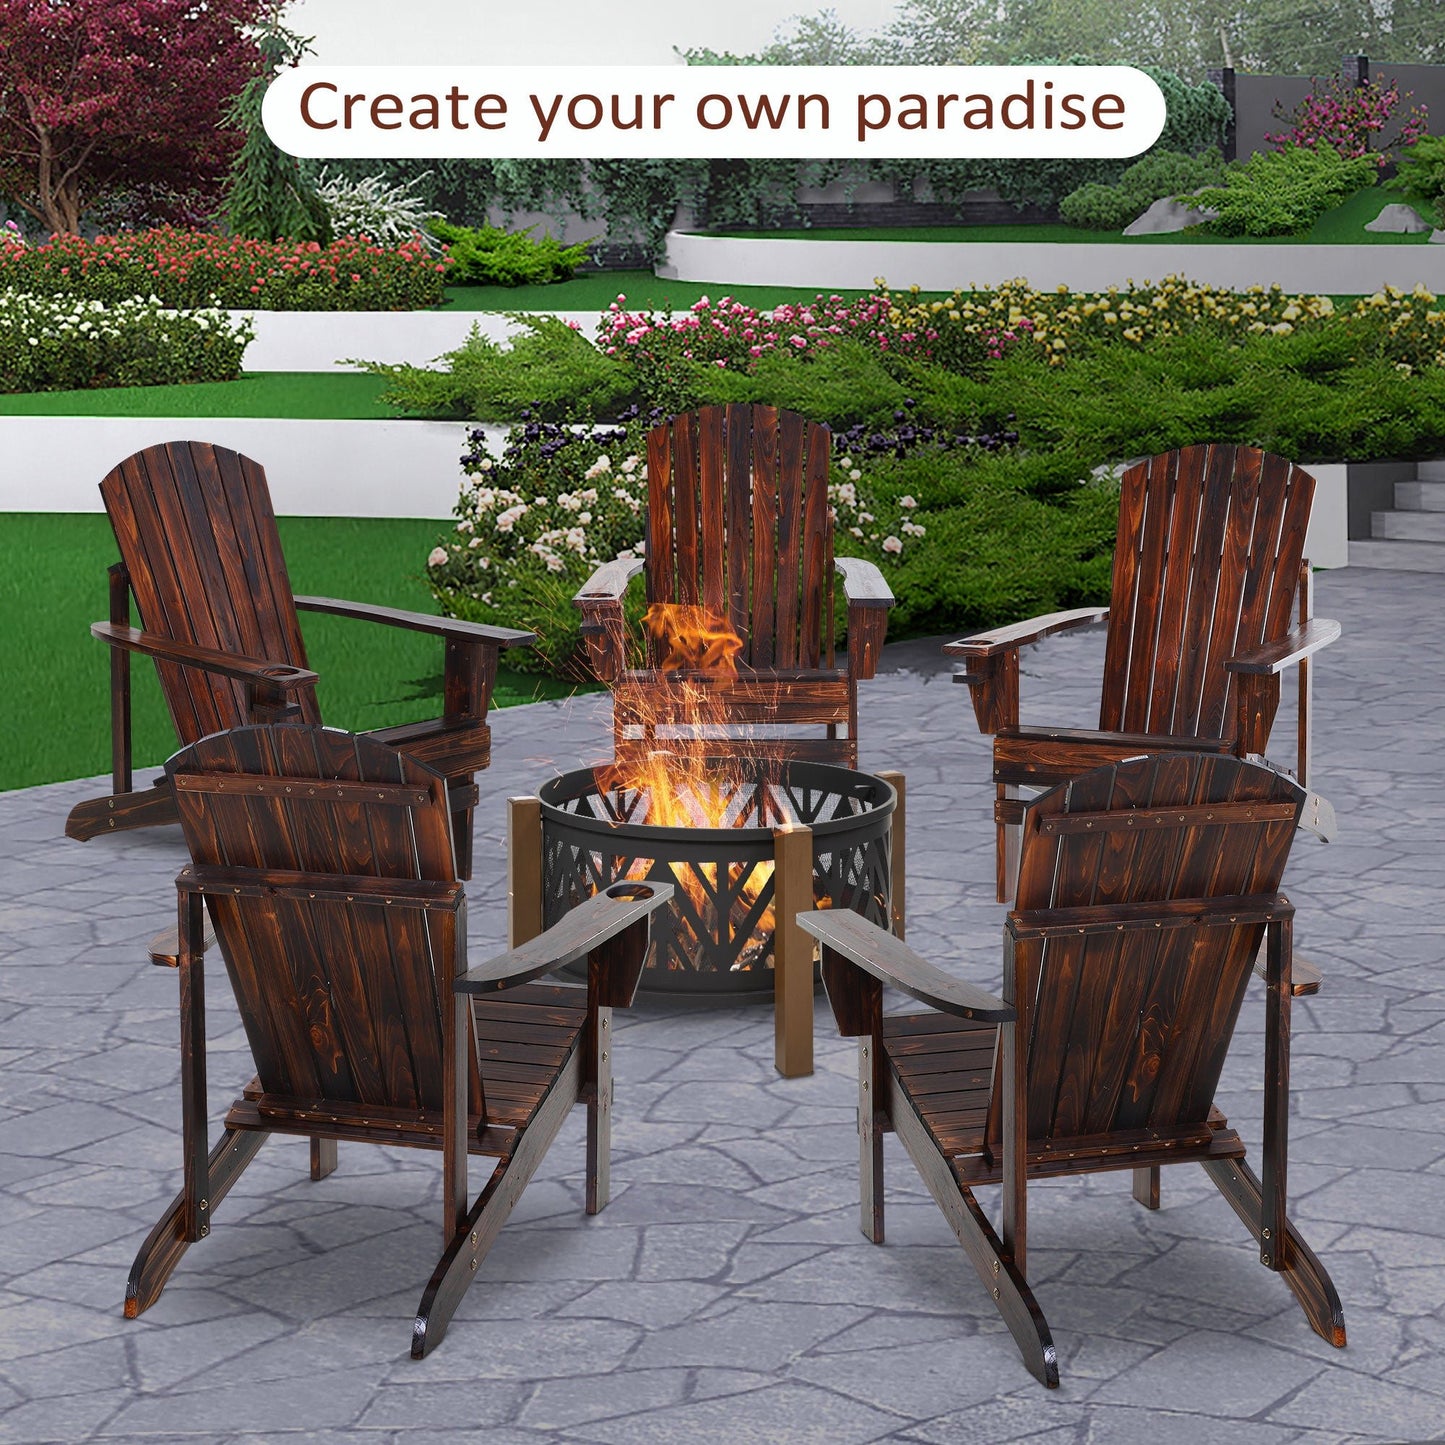 Outdoor and Garden-Oversized Adirondack Chair, Outdoor Fire Pit and Porch Seating, Classic Log Lounge w/ Built-in Cupholder for Patio, Lawn, Deck, Brown - Outdoor Style Company